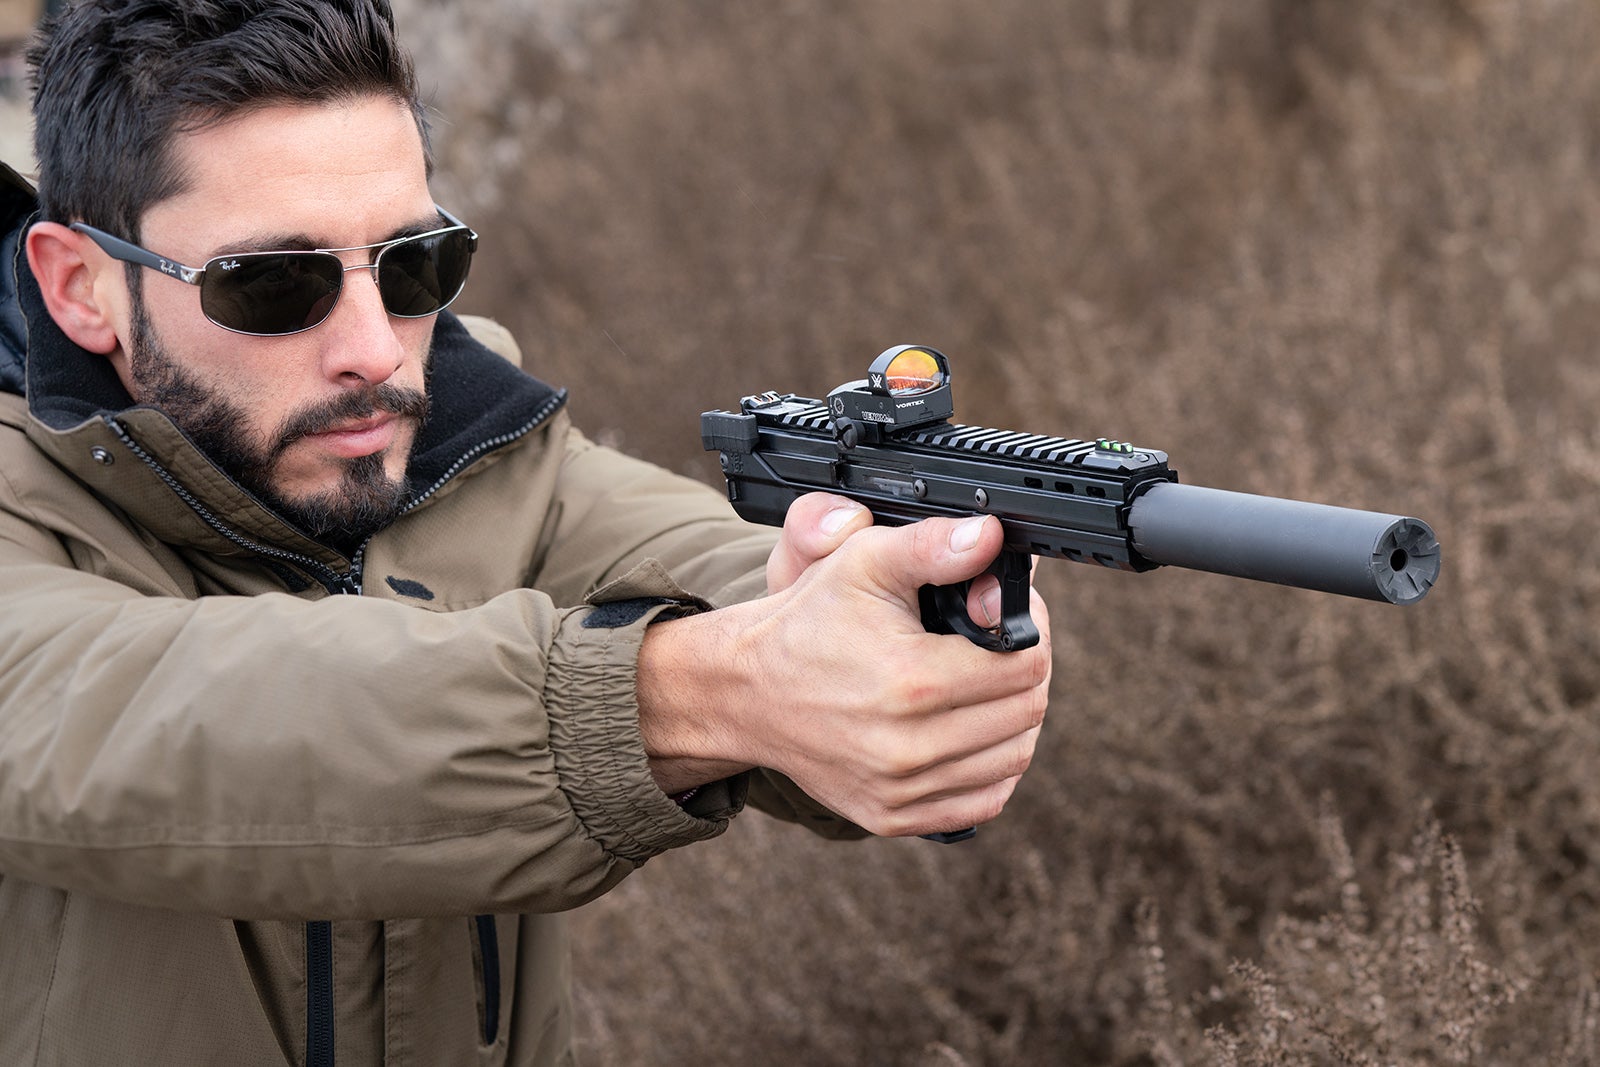 Kel-Tec’s secret is out: The KS7 shotgun and CP33 pistol are here.